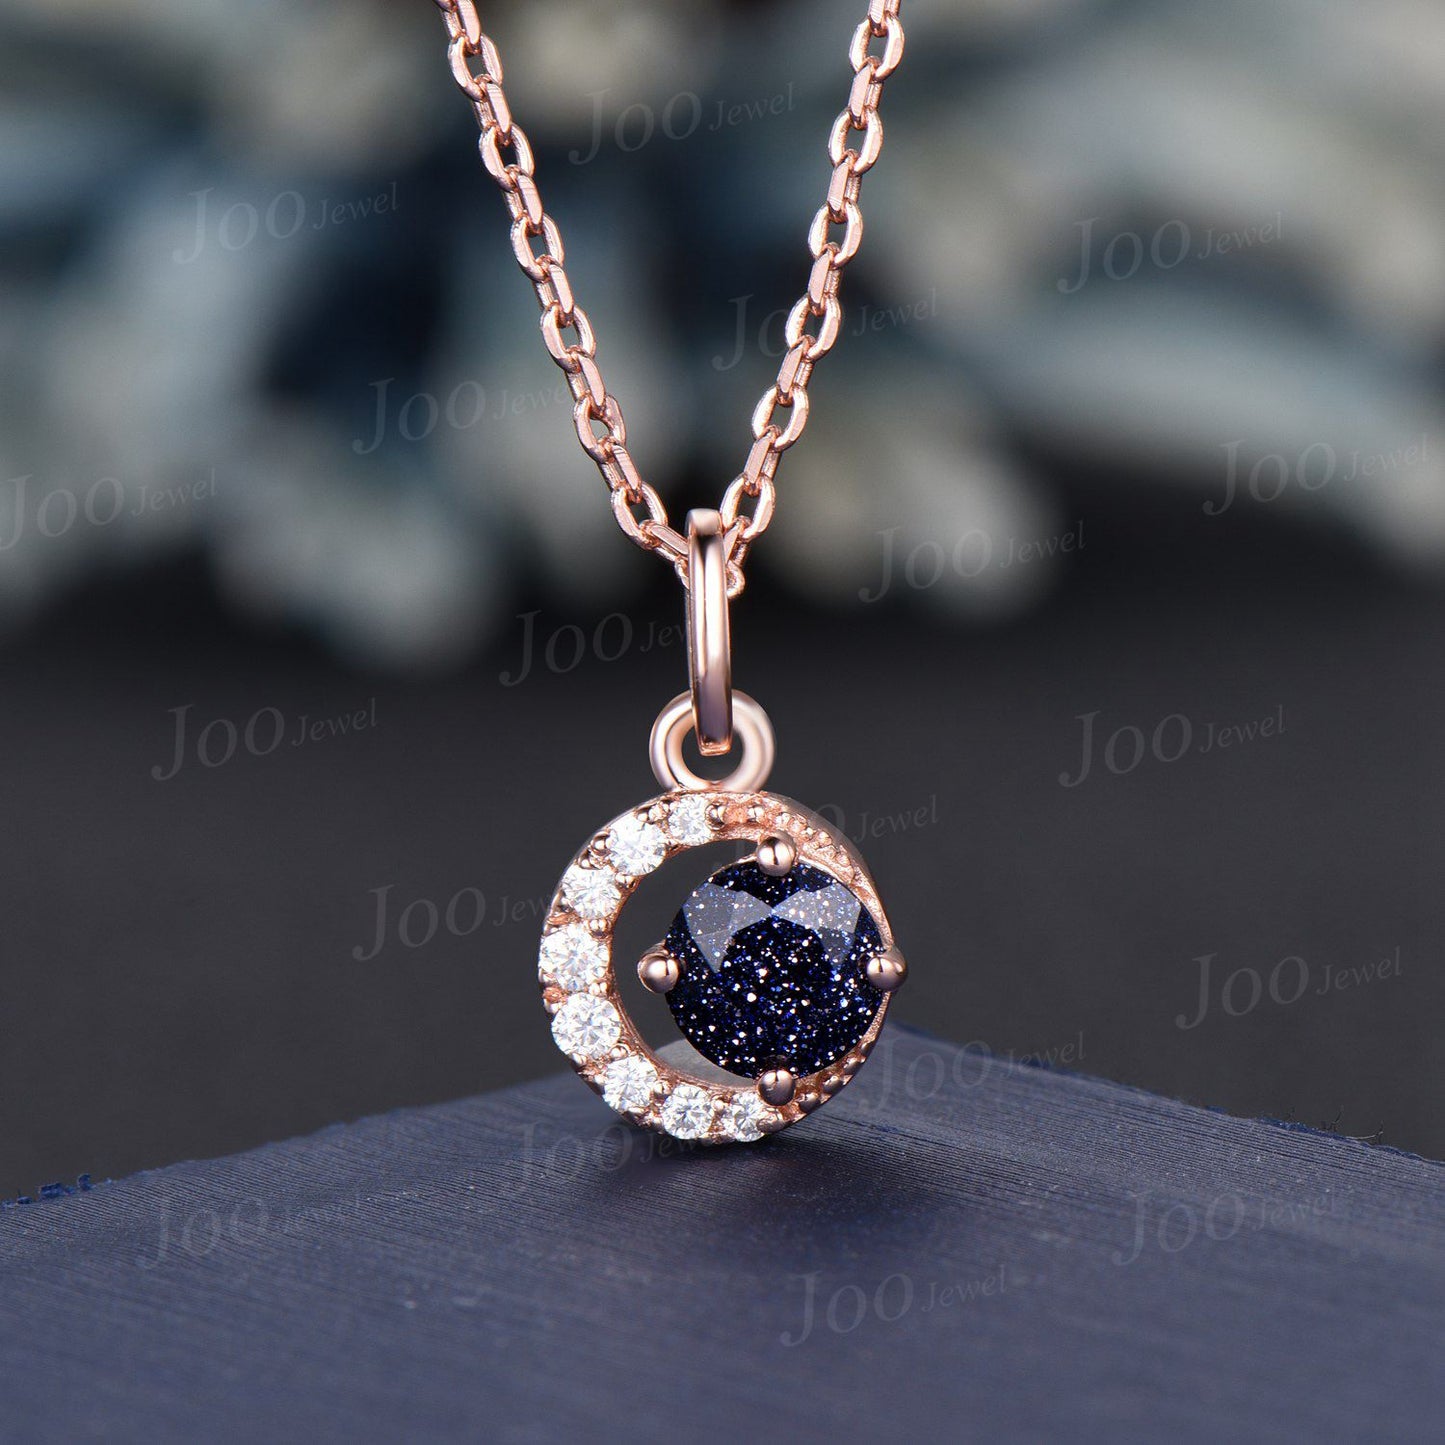 Dainty Round Blue Sandstone Pendant Necklace Silver/14K Yellow Gold Starry Sky Blue Goldstone Wedding Necklace Unique Celestial Moon Jewelry